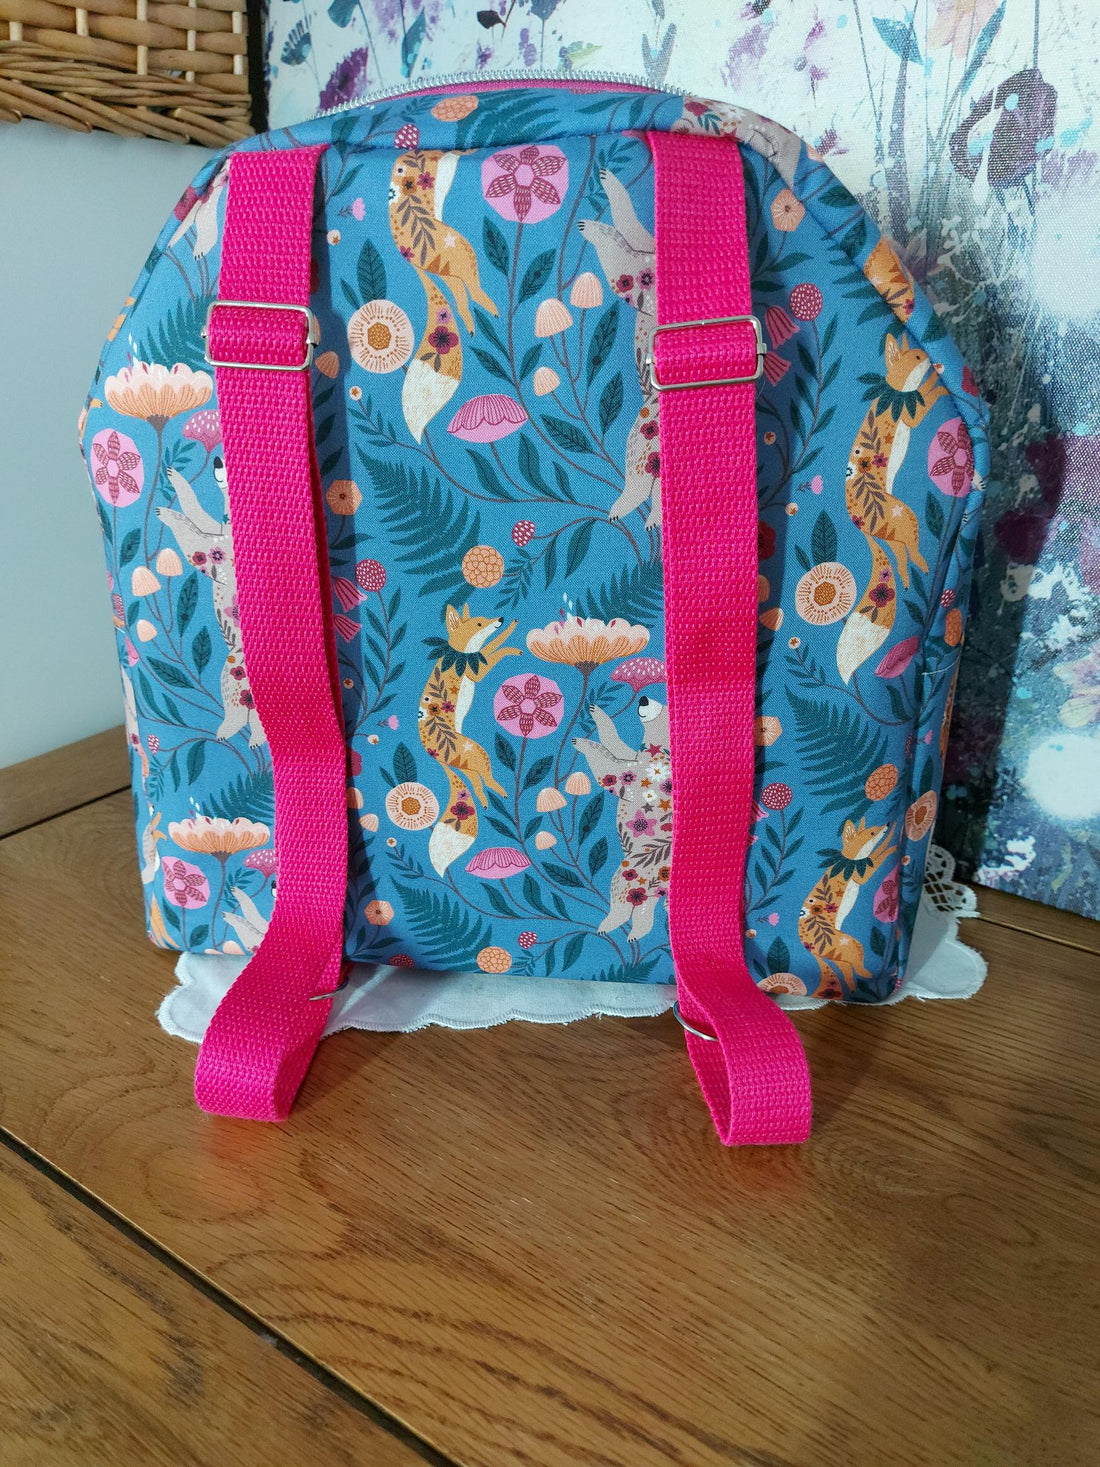 June has made a wonderful child's backpack!